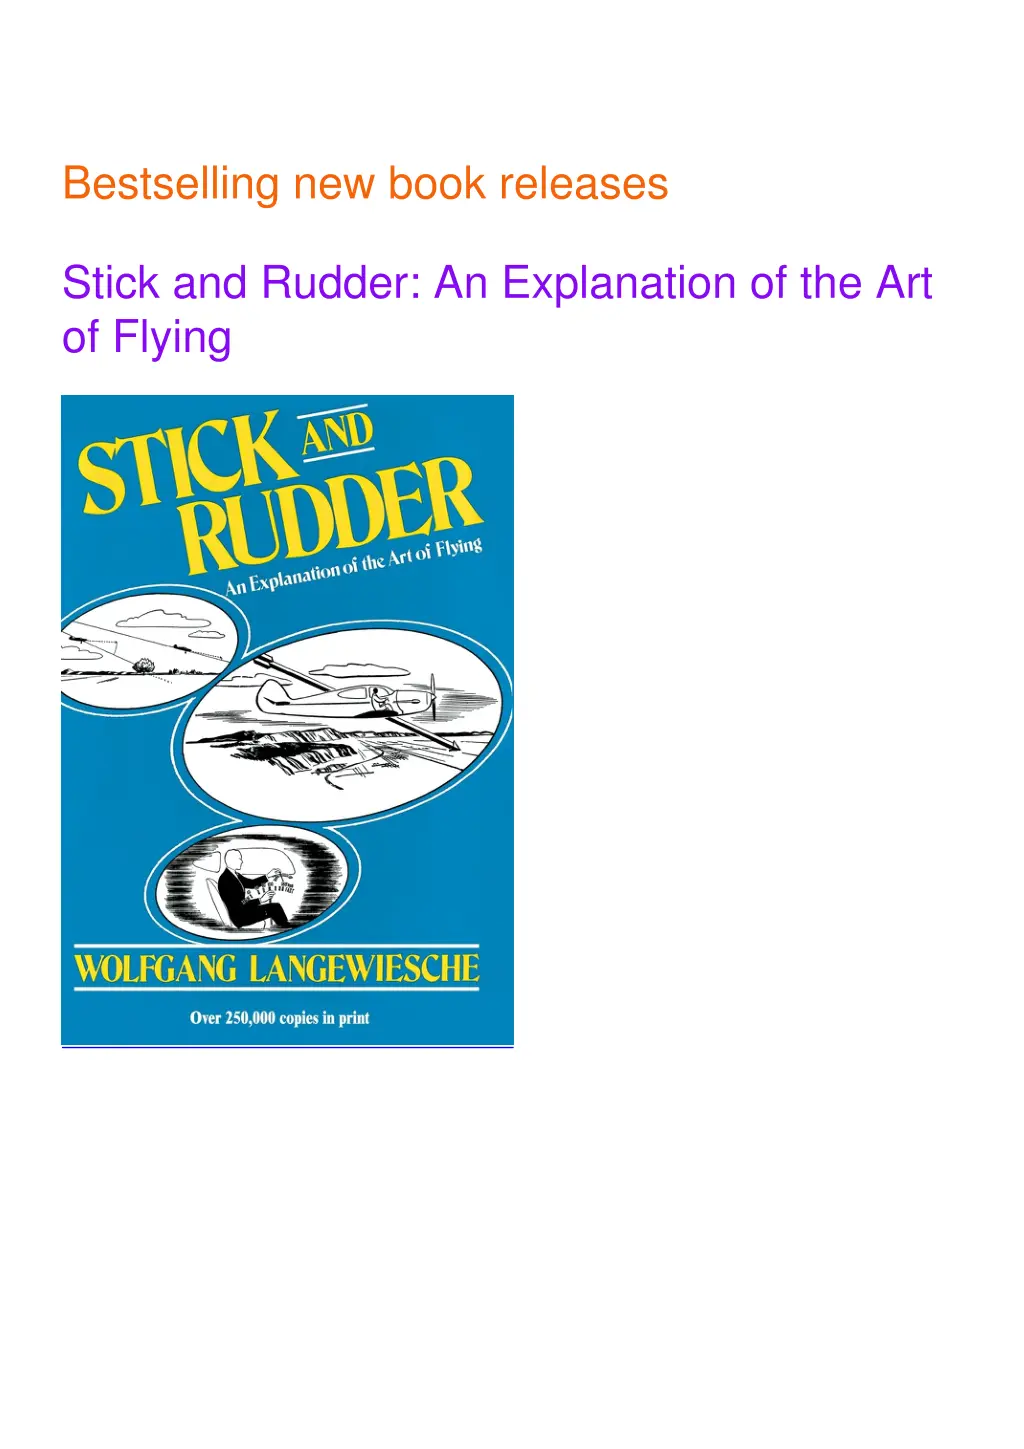 bestselling new book releases stick and rudder